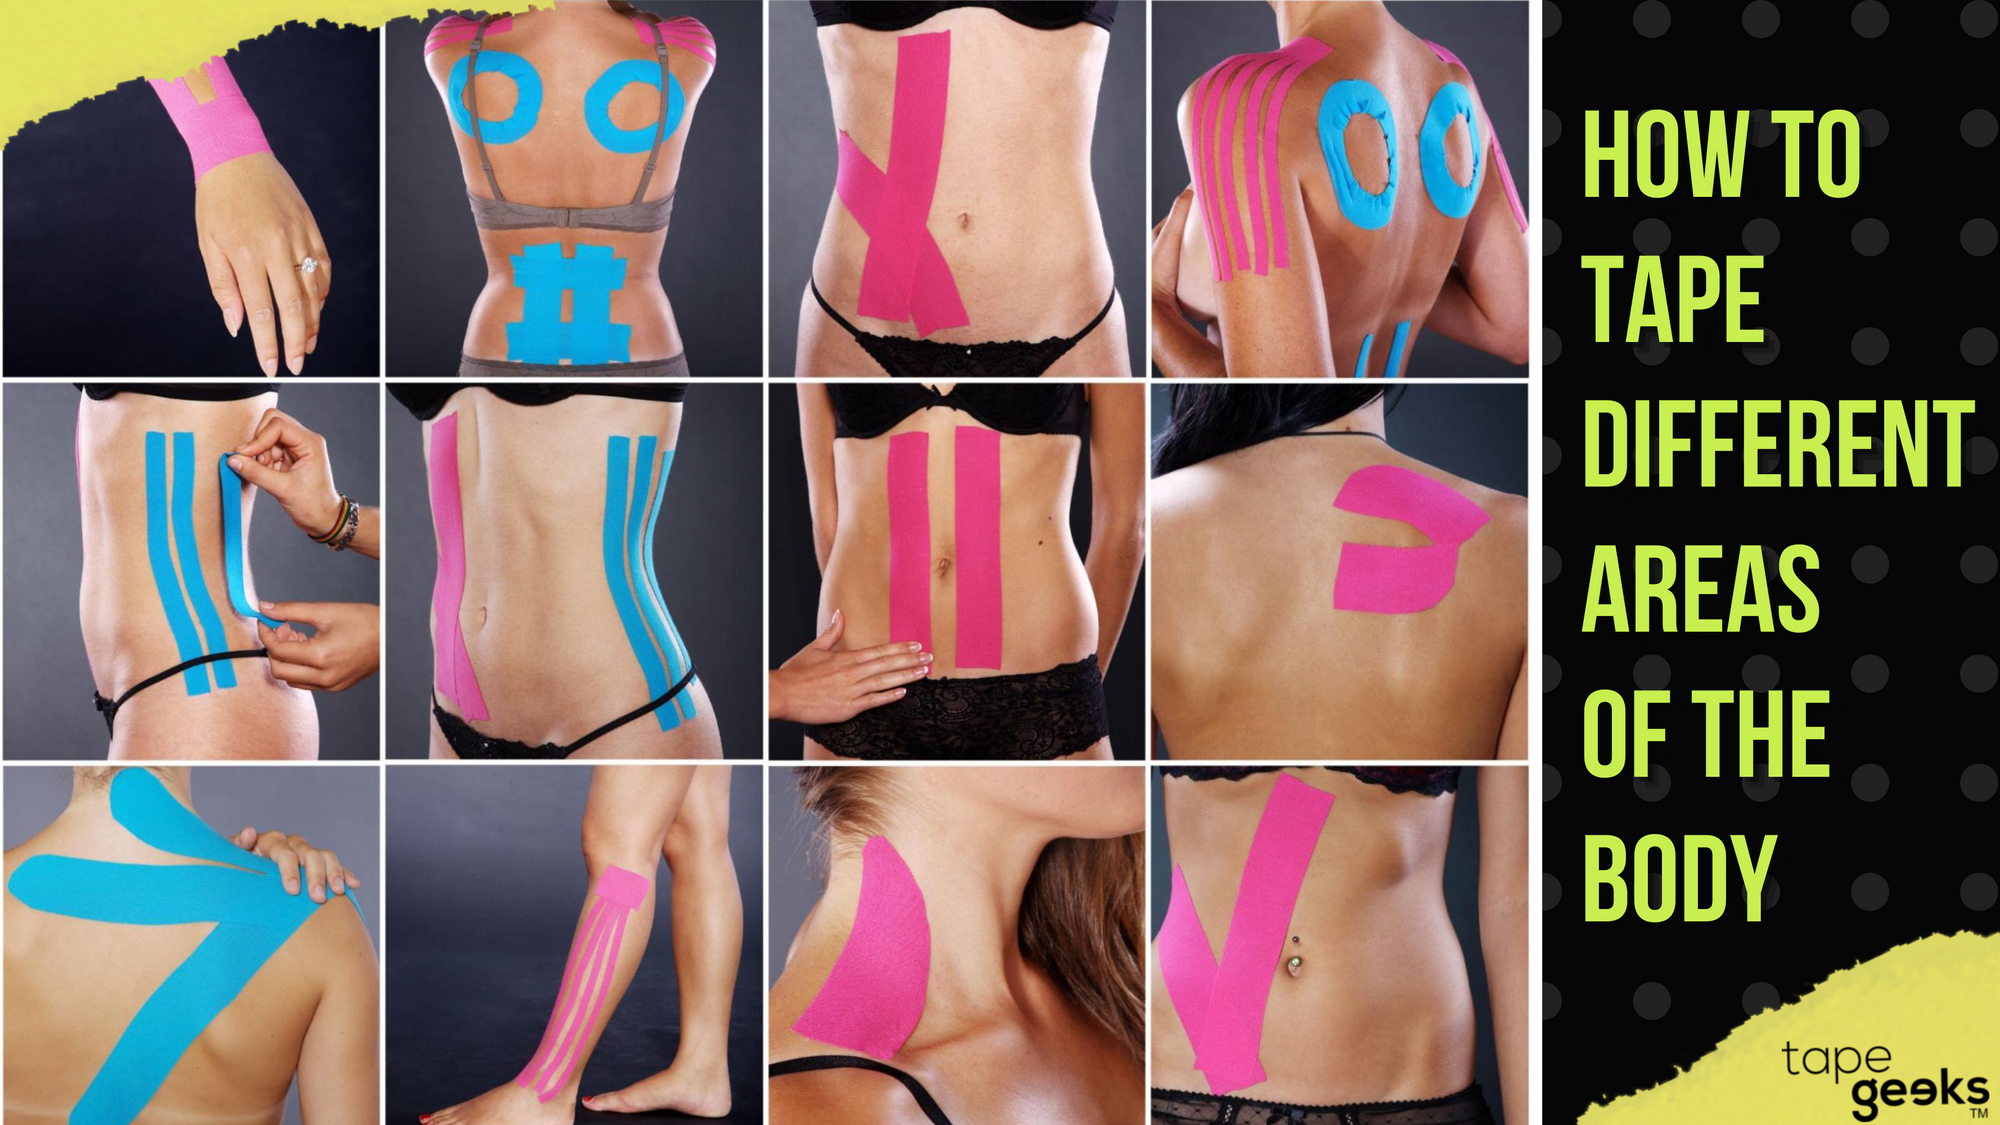 How to apply kinesiology tape on different areas of the body